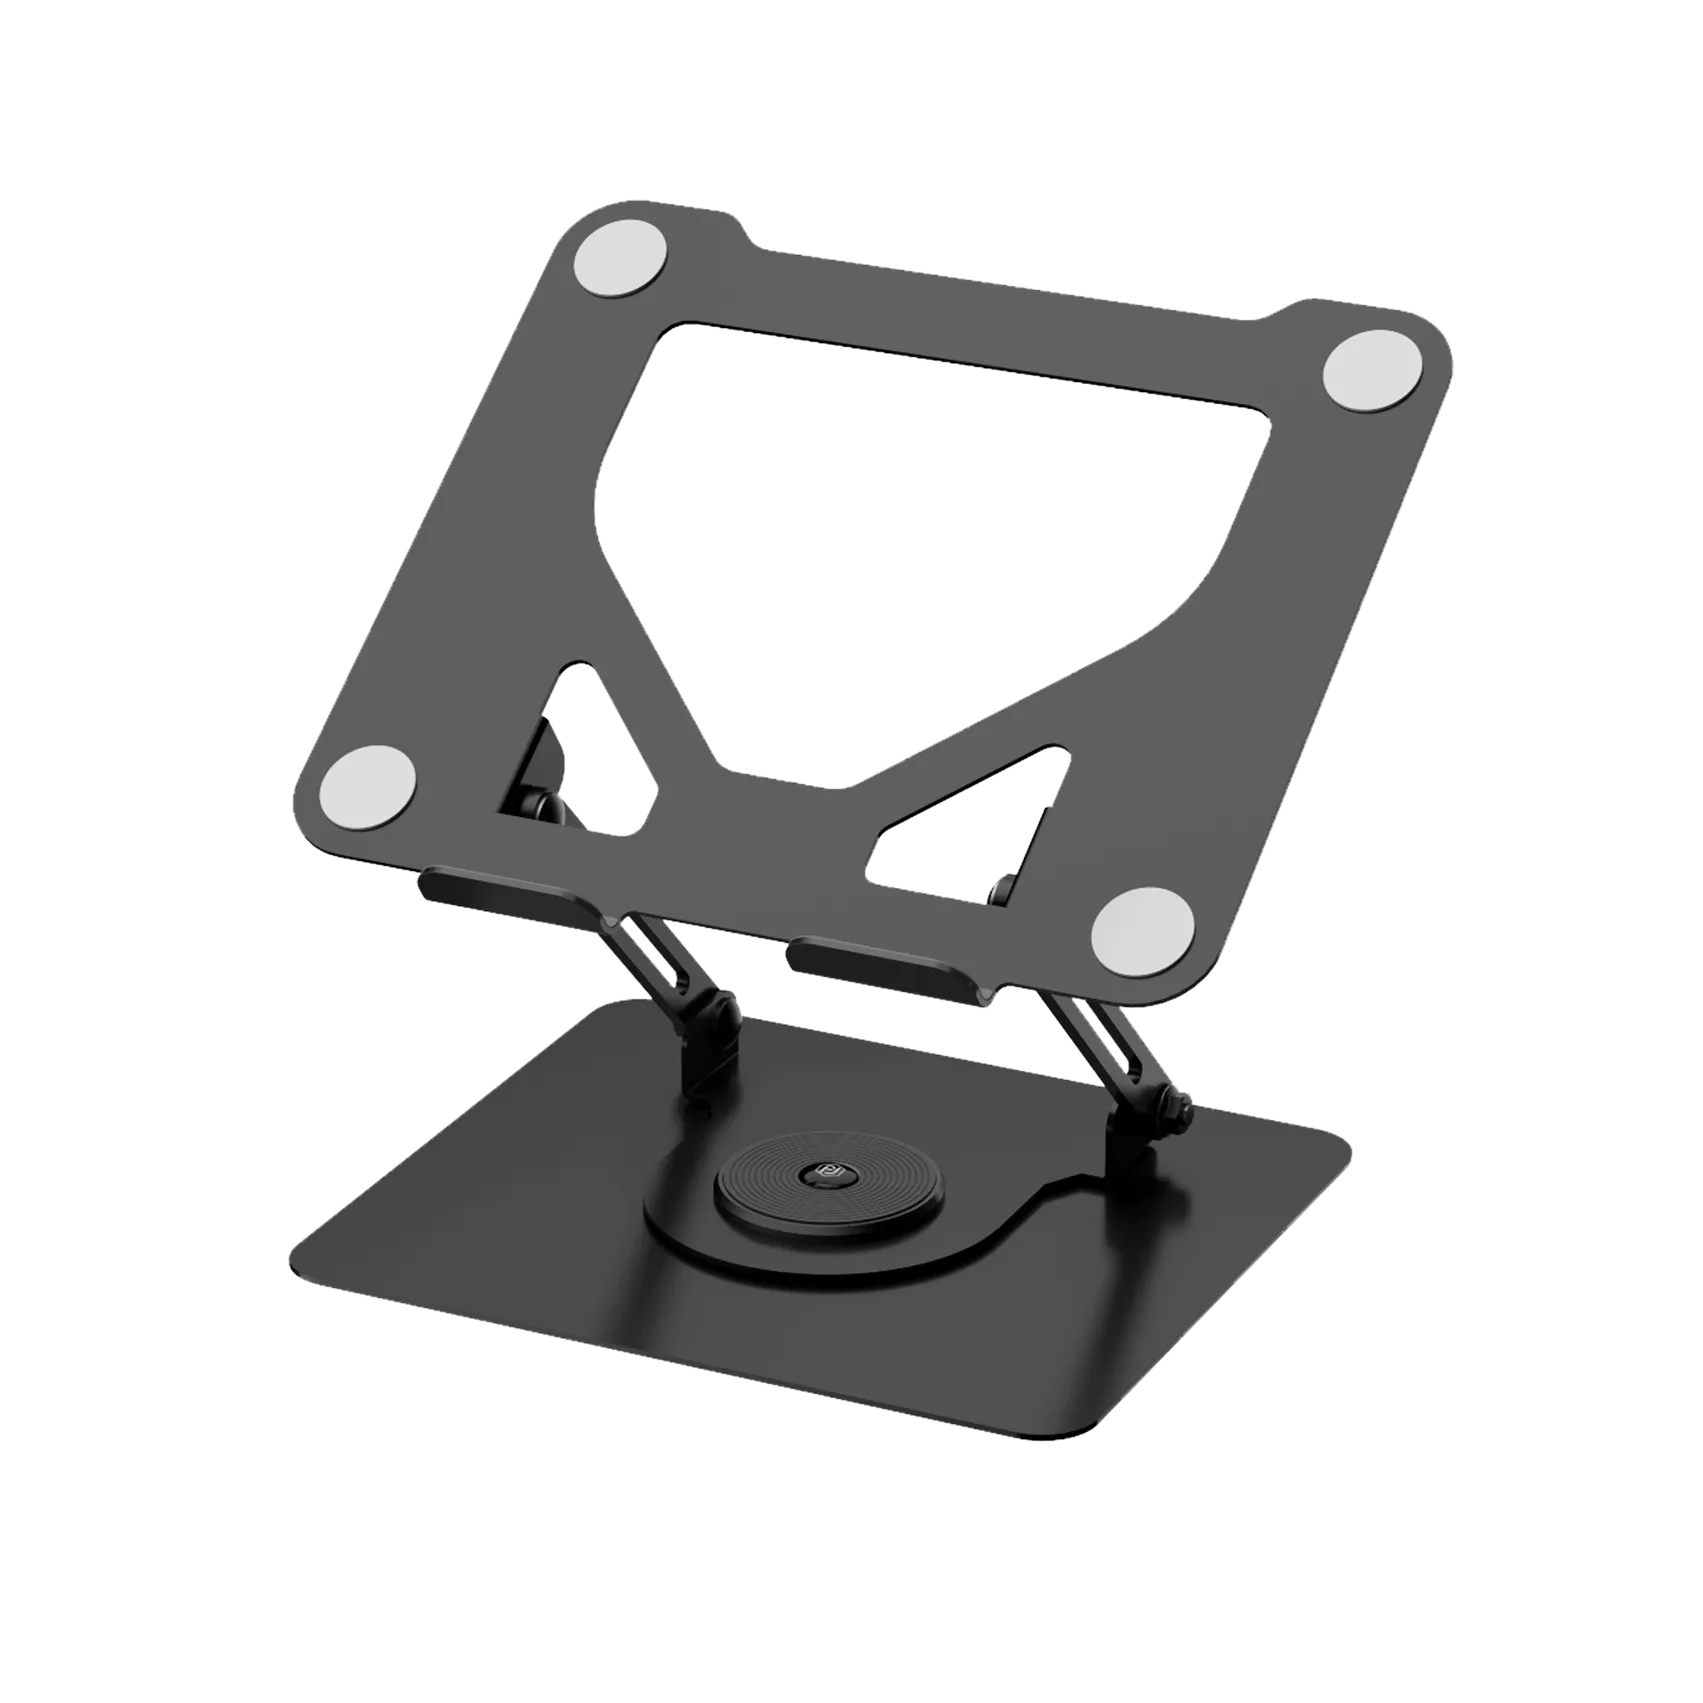 Isolated image of an ergonomic laptop stand, adjustable for custom desk setups in Singapore.